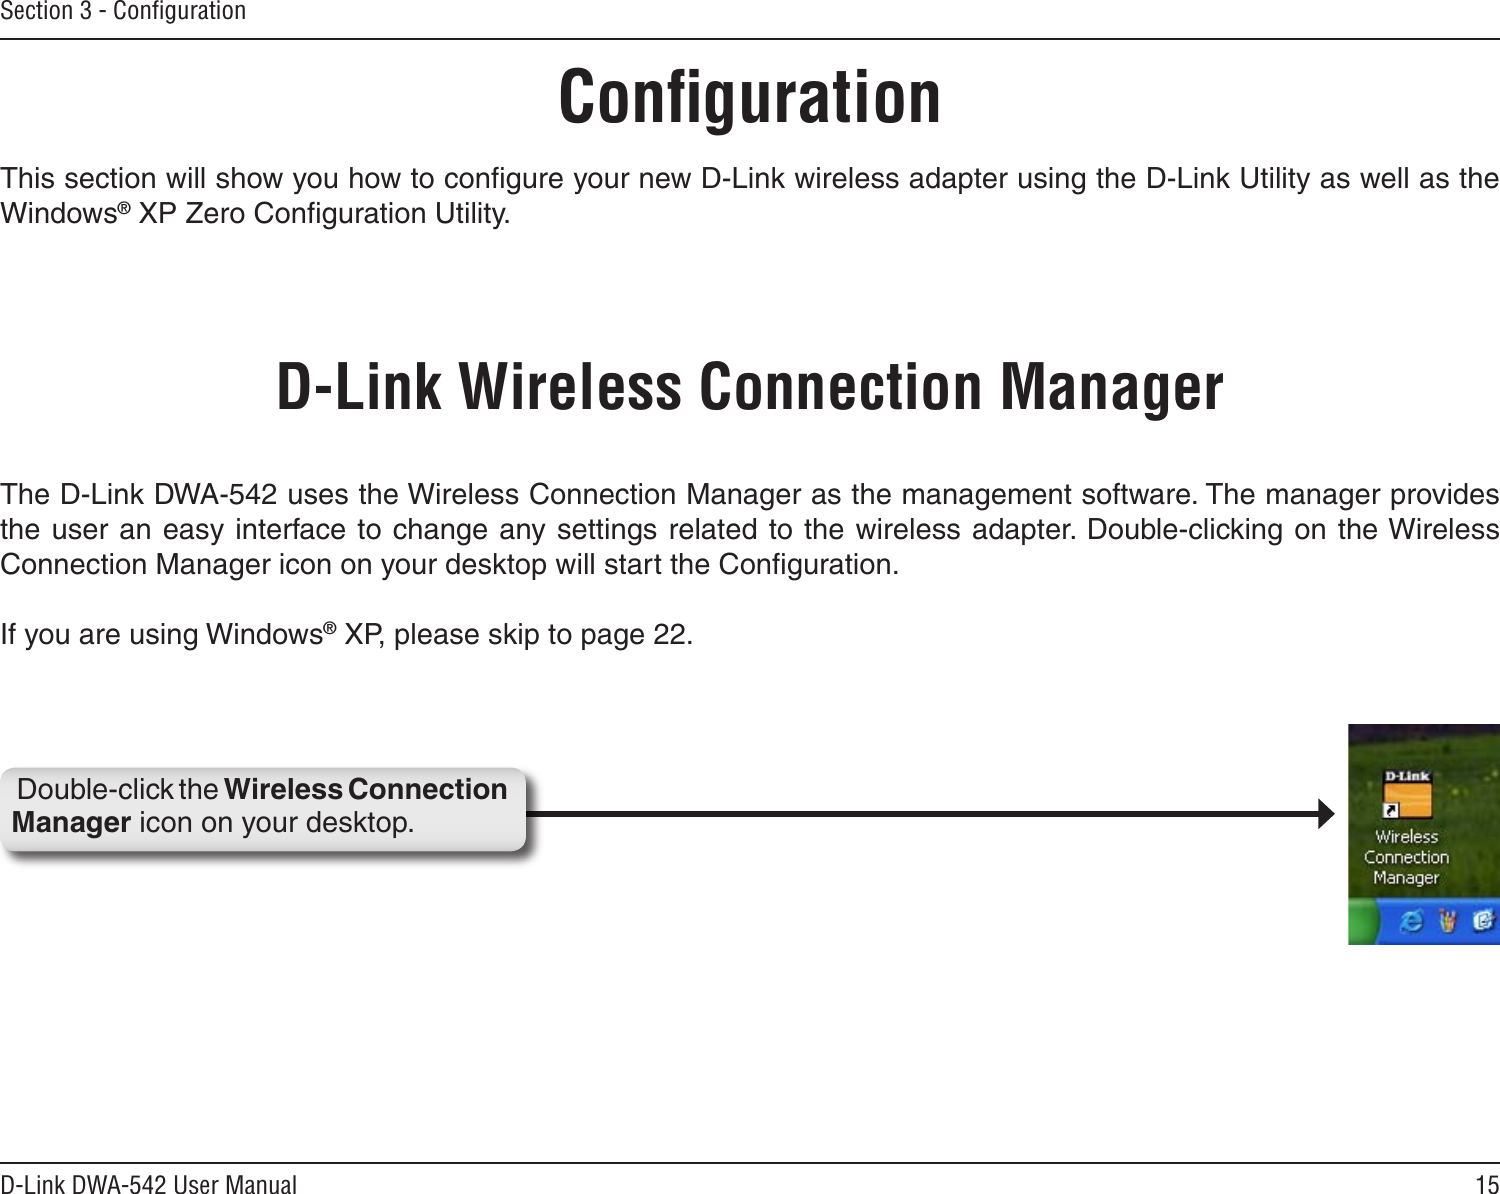 15D-Link DWA-542 User ManualSection 3 - ConﬁgurationConﬁgurationThis section will show you how to conﬁgure your new D-Link wireless adapter using the D-Link Utility as well as the Windows® XP Zero Conﬁguration Utility.D-Link Wireless Connection ManagerThe D-Link DWA-542 uses the Wireless Connection Manager as the management software. The manager provides the user an easy interface to change any settings related to the wireless adapter. Double-clicking on the Wireless Connection Manager icon on your desktop will start the Conﬁguration.If you are using Windows® XP, please skip to page 22.Double-click the Wireless Connection Manager icon on your desktop.